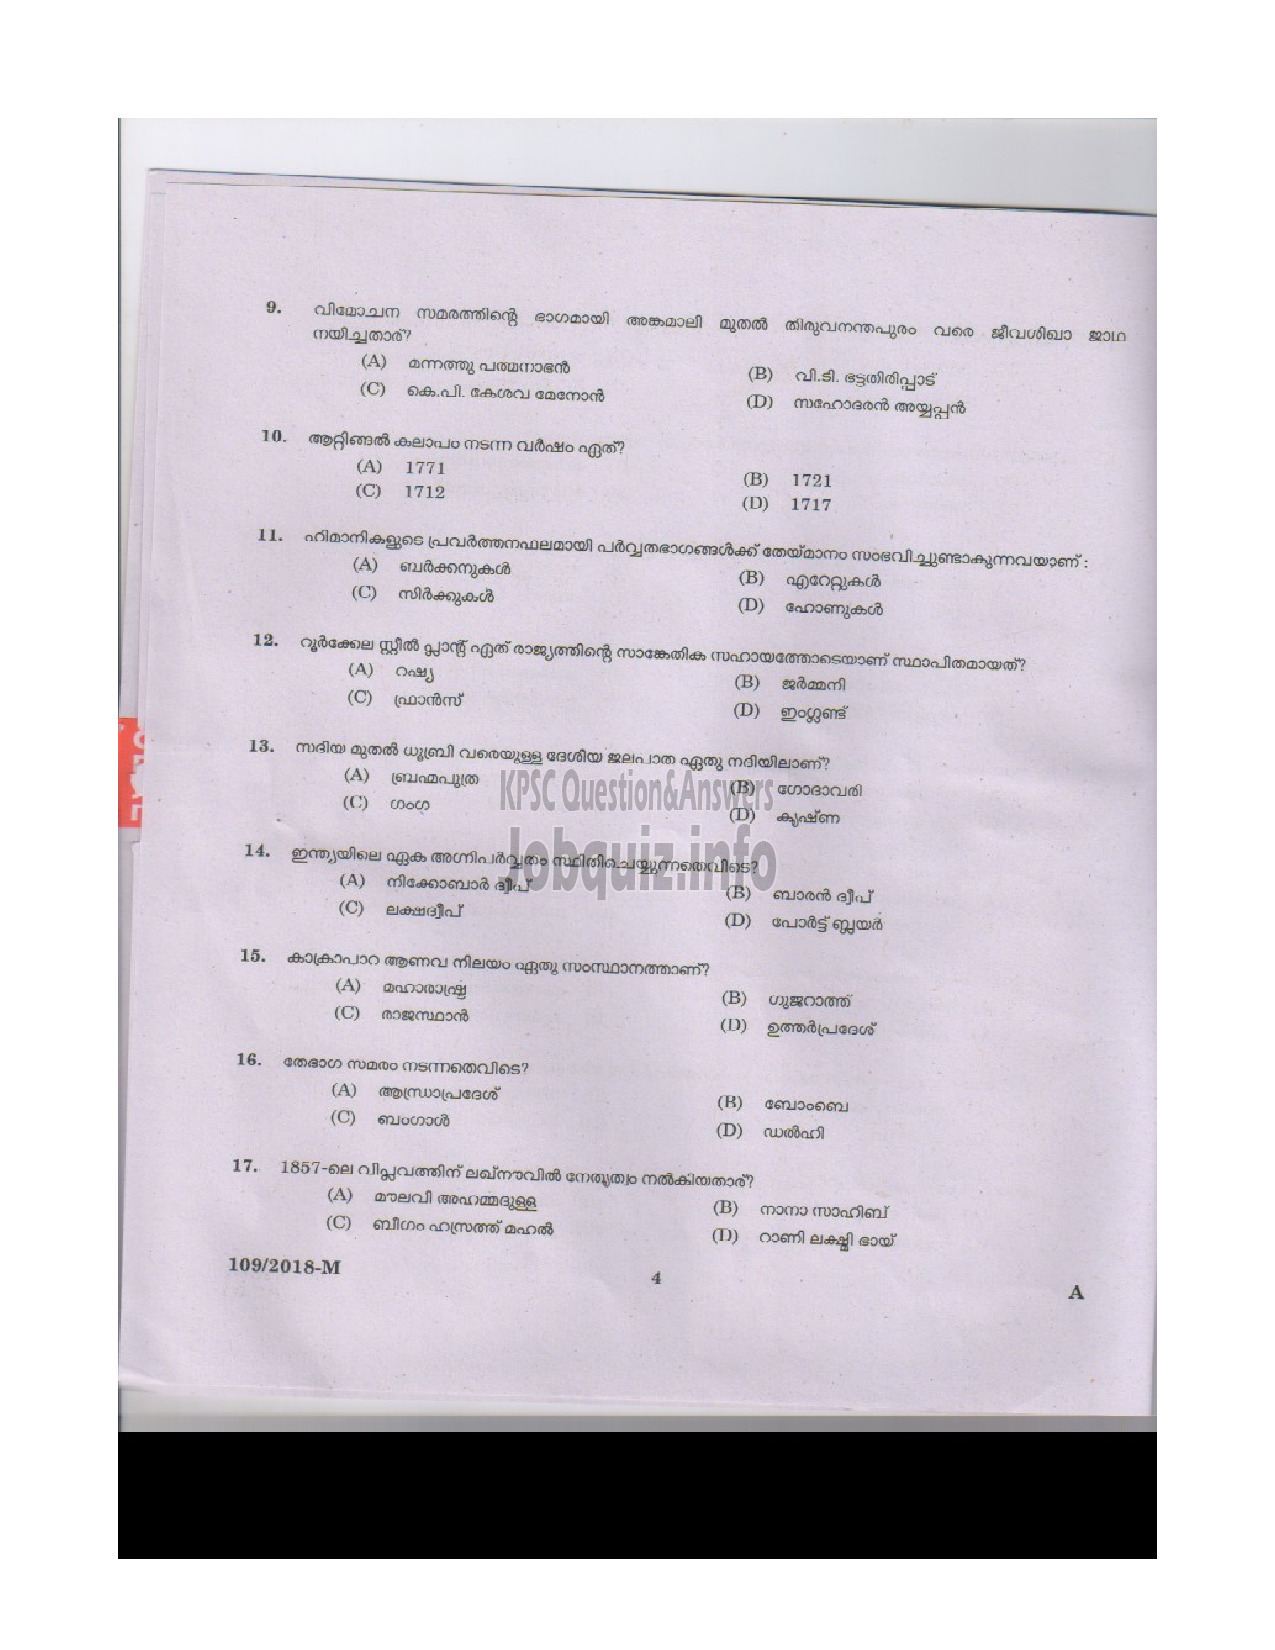 Kerala PSC Question Paper - ATTENDER GR II LIGHT KEEPER SIGNALLER CLERICAL ATTENDER FEMALE ASSISTANT PRISON OFFICER LAB ATTENDER HOMOEOPATHY Malayalam/English -3